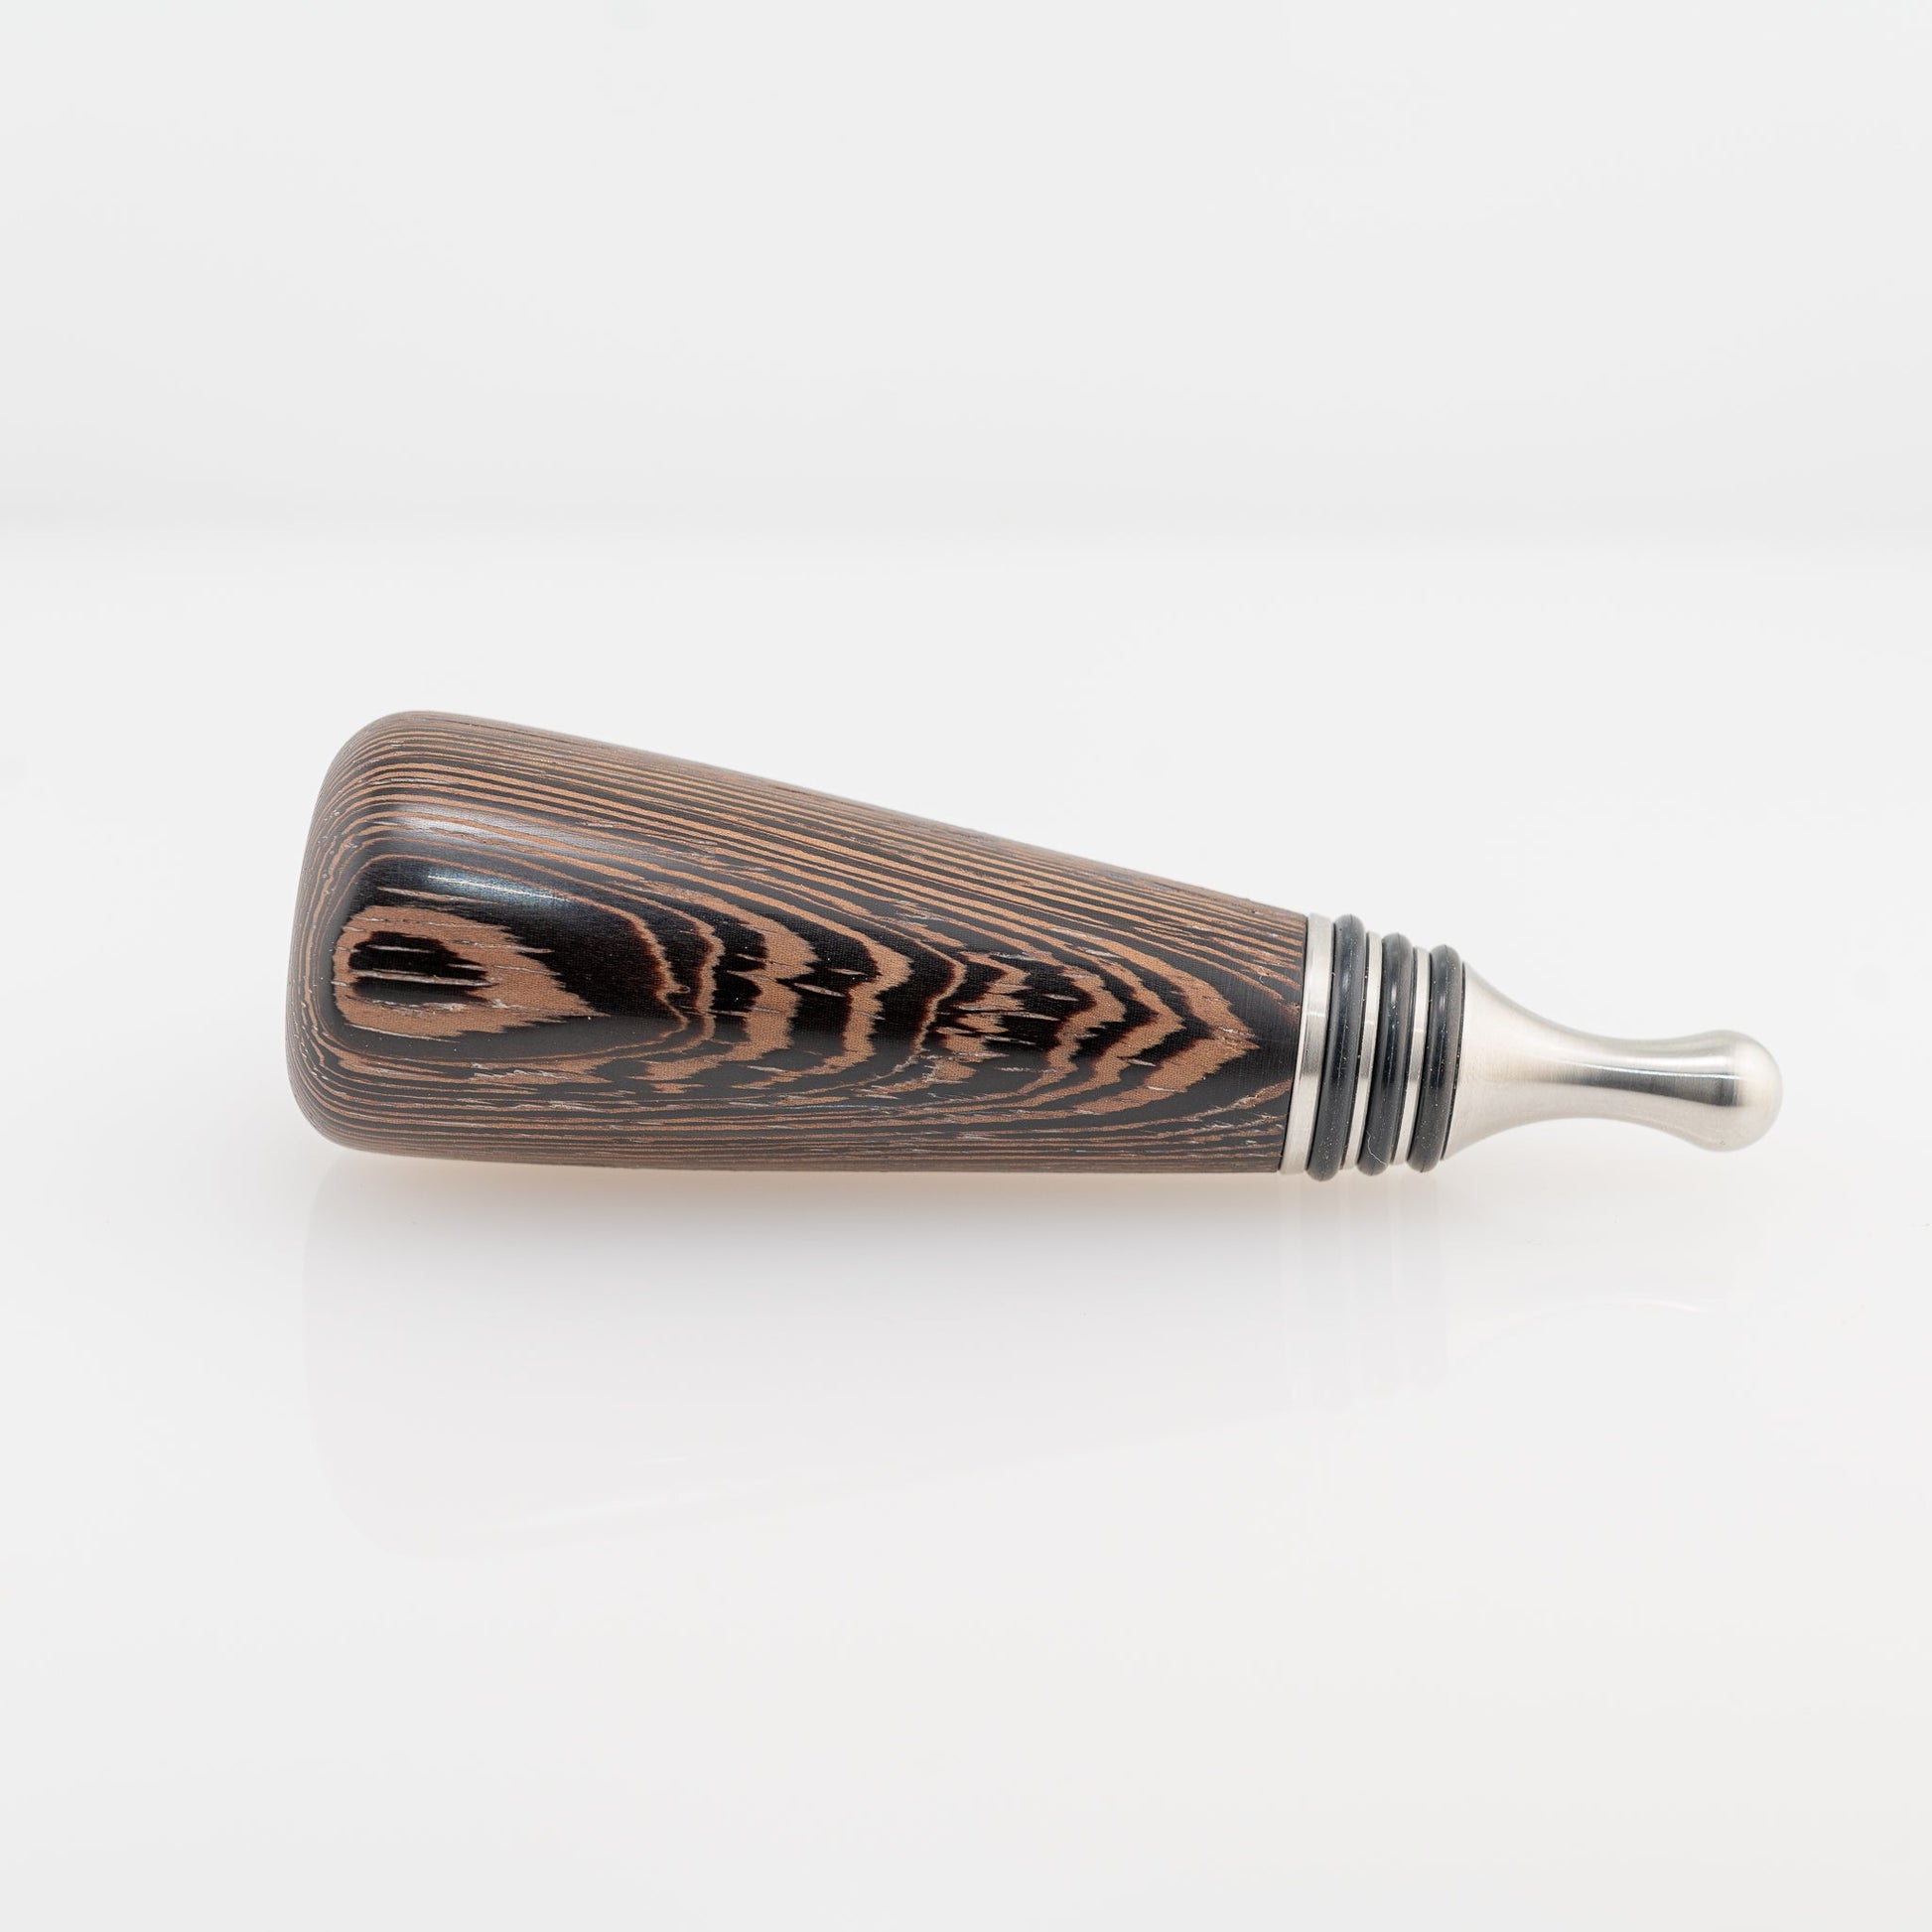 A hanmade Wenge wood bottle stopper rests on its side. The dropper is stainless steel with three black silicon gaskets.